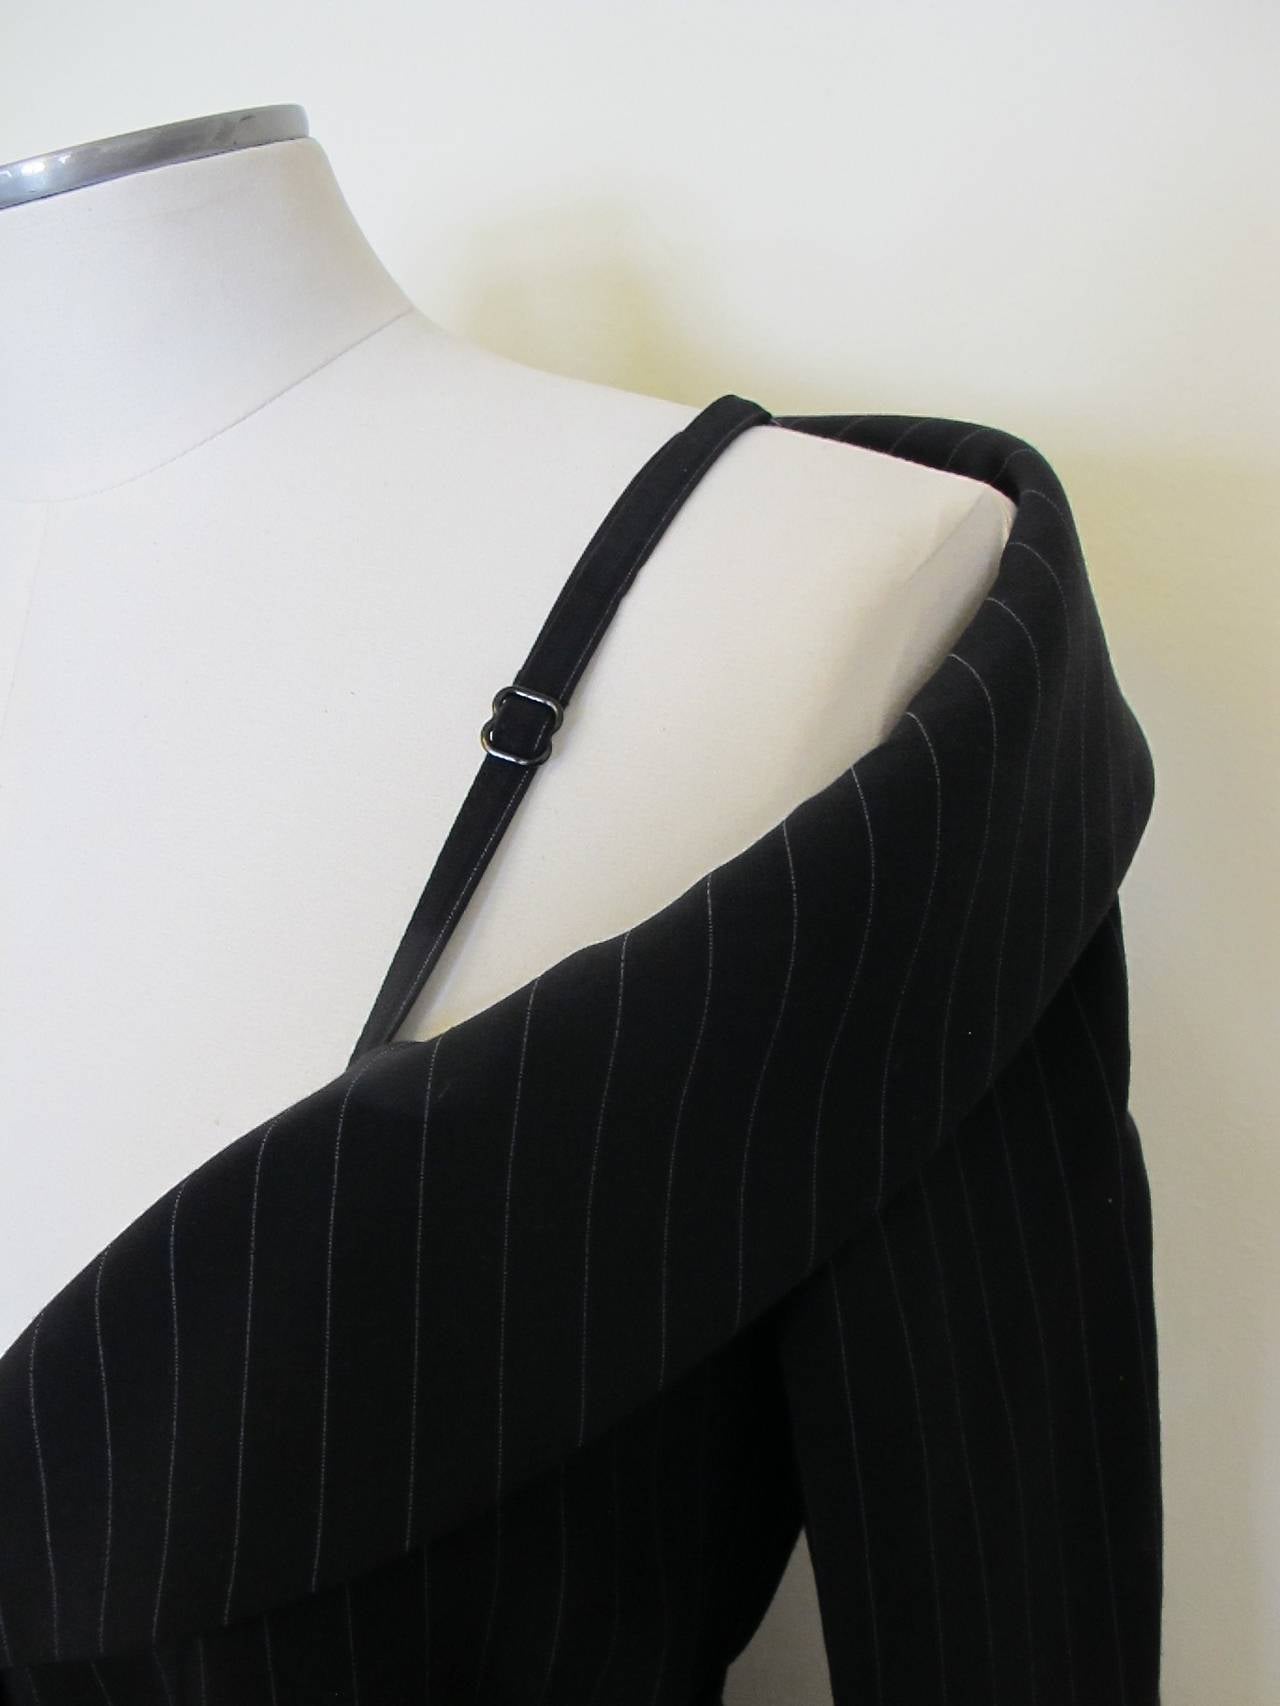 New from Neiman Marcus: chic Jean Paul Gaultier black dress with silver grey pinstripe and matching belt which is 2 inches wide by 61 inches long. The dress is a straight cut: Gaultier cleverly has inverted a corset bra strap which is adjustable on